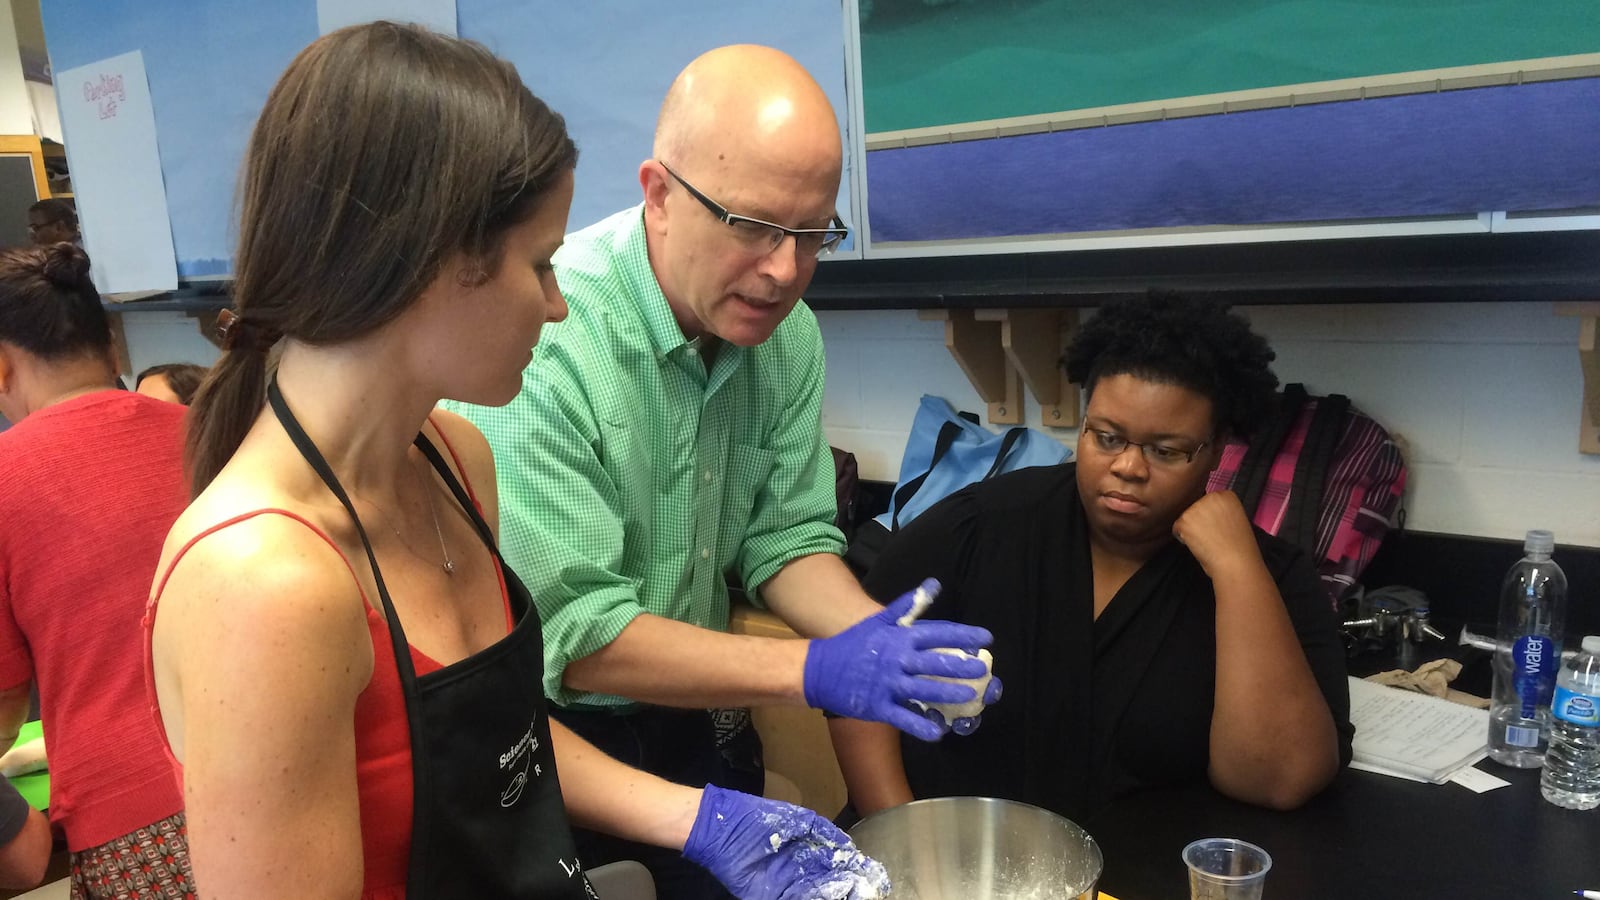 Former White House pastry chef Bill Yosses shows teachers how to make yeast.